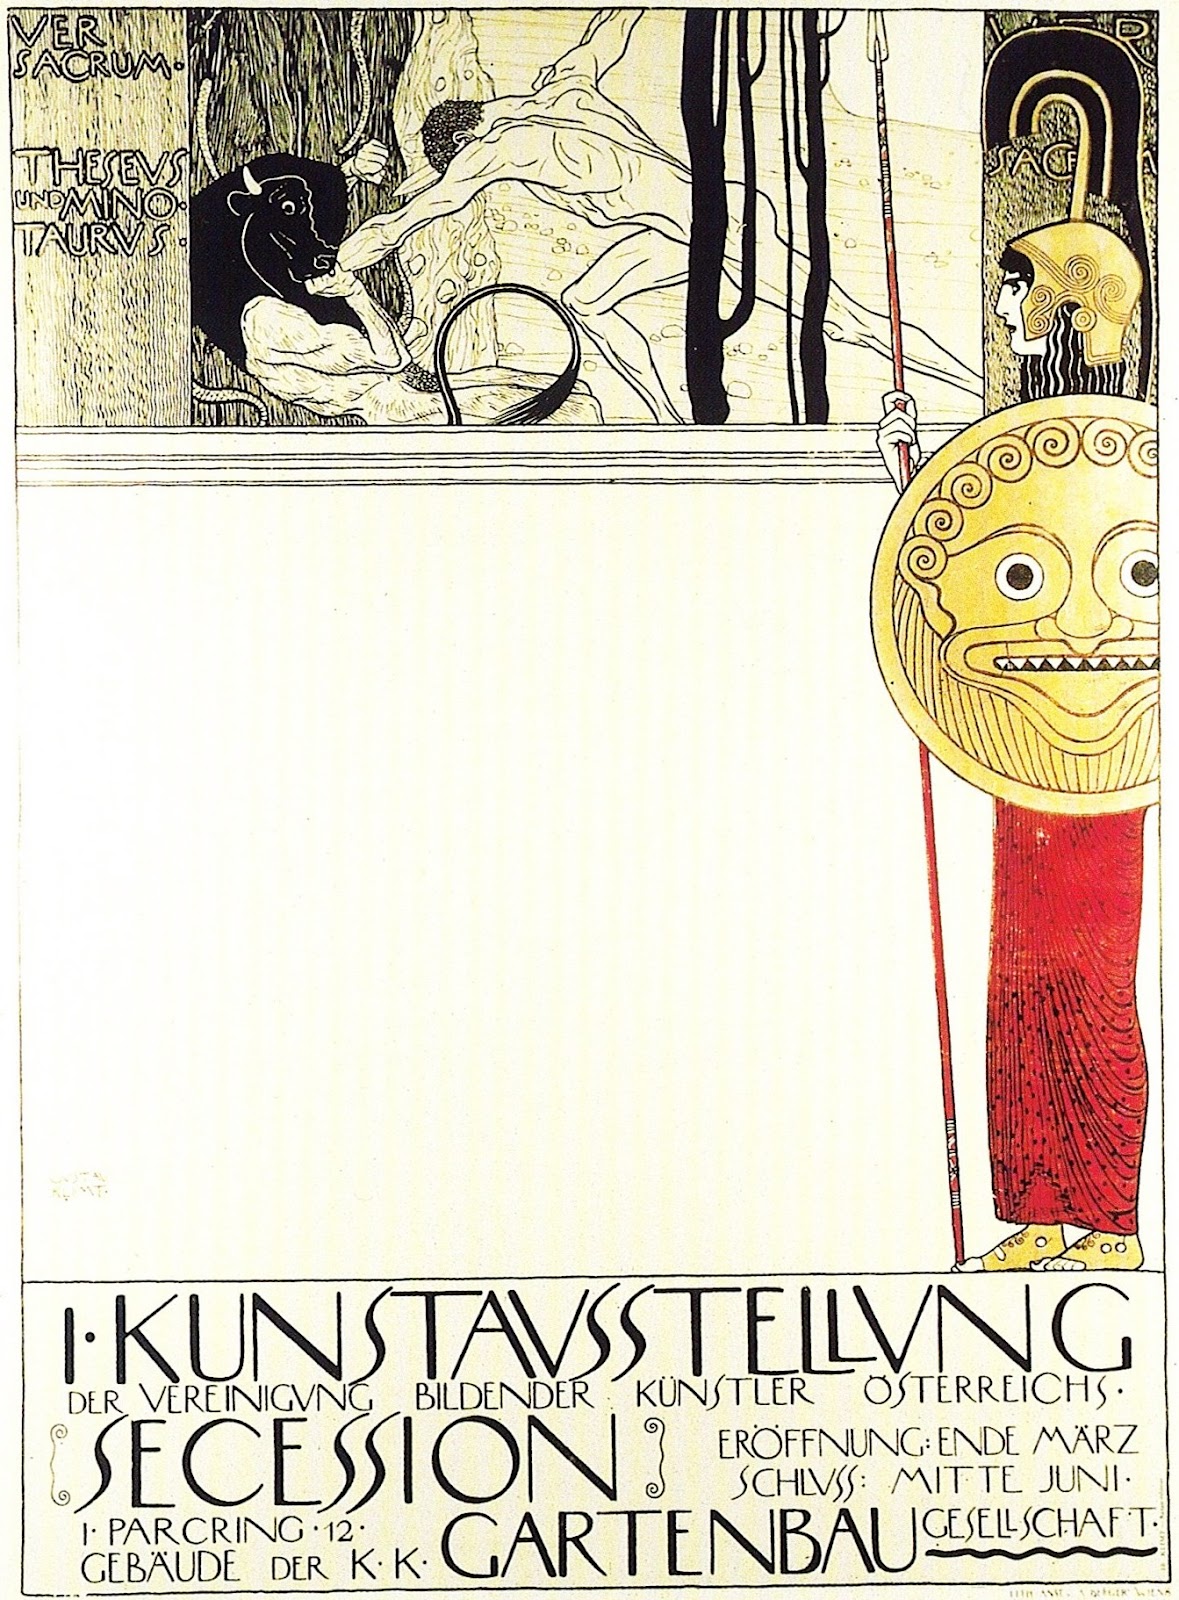 [Gustav_Klimt_Cover-of-Ver-Sacrum-the-journal-of-the-Viennese-Secession-of-Theseus-and-the-Minotaur-Posters%255B6%255D.jpg]